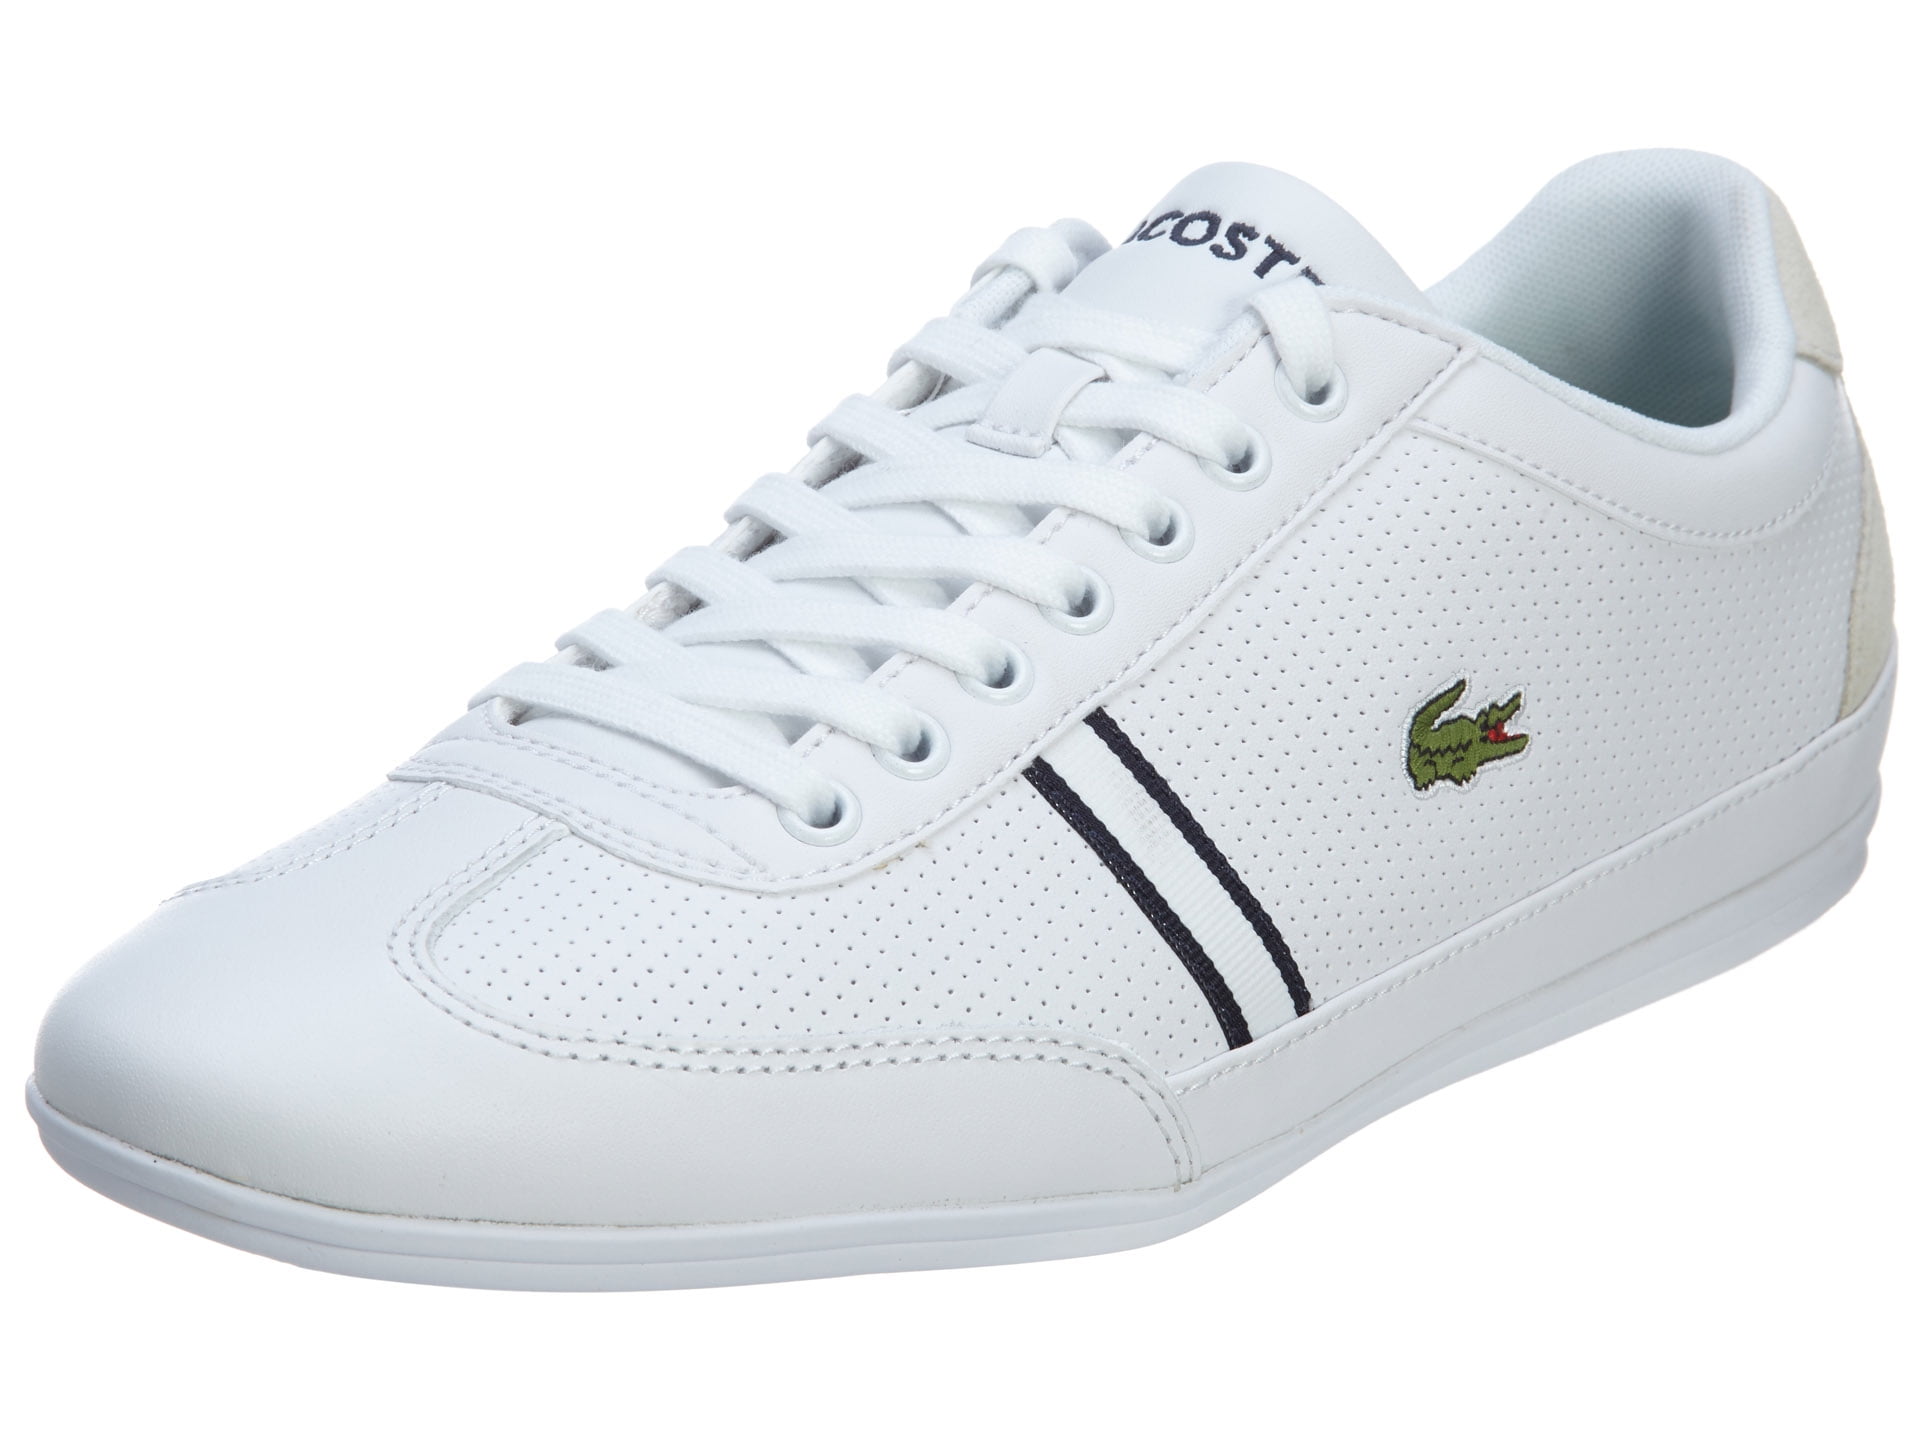 Lacoste Misano Sport Htb Spm Leather/synthetic Mens Style : 7-29spm2024 -